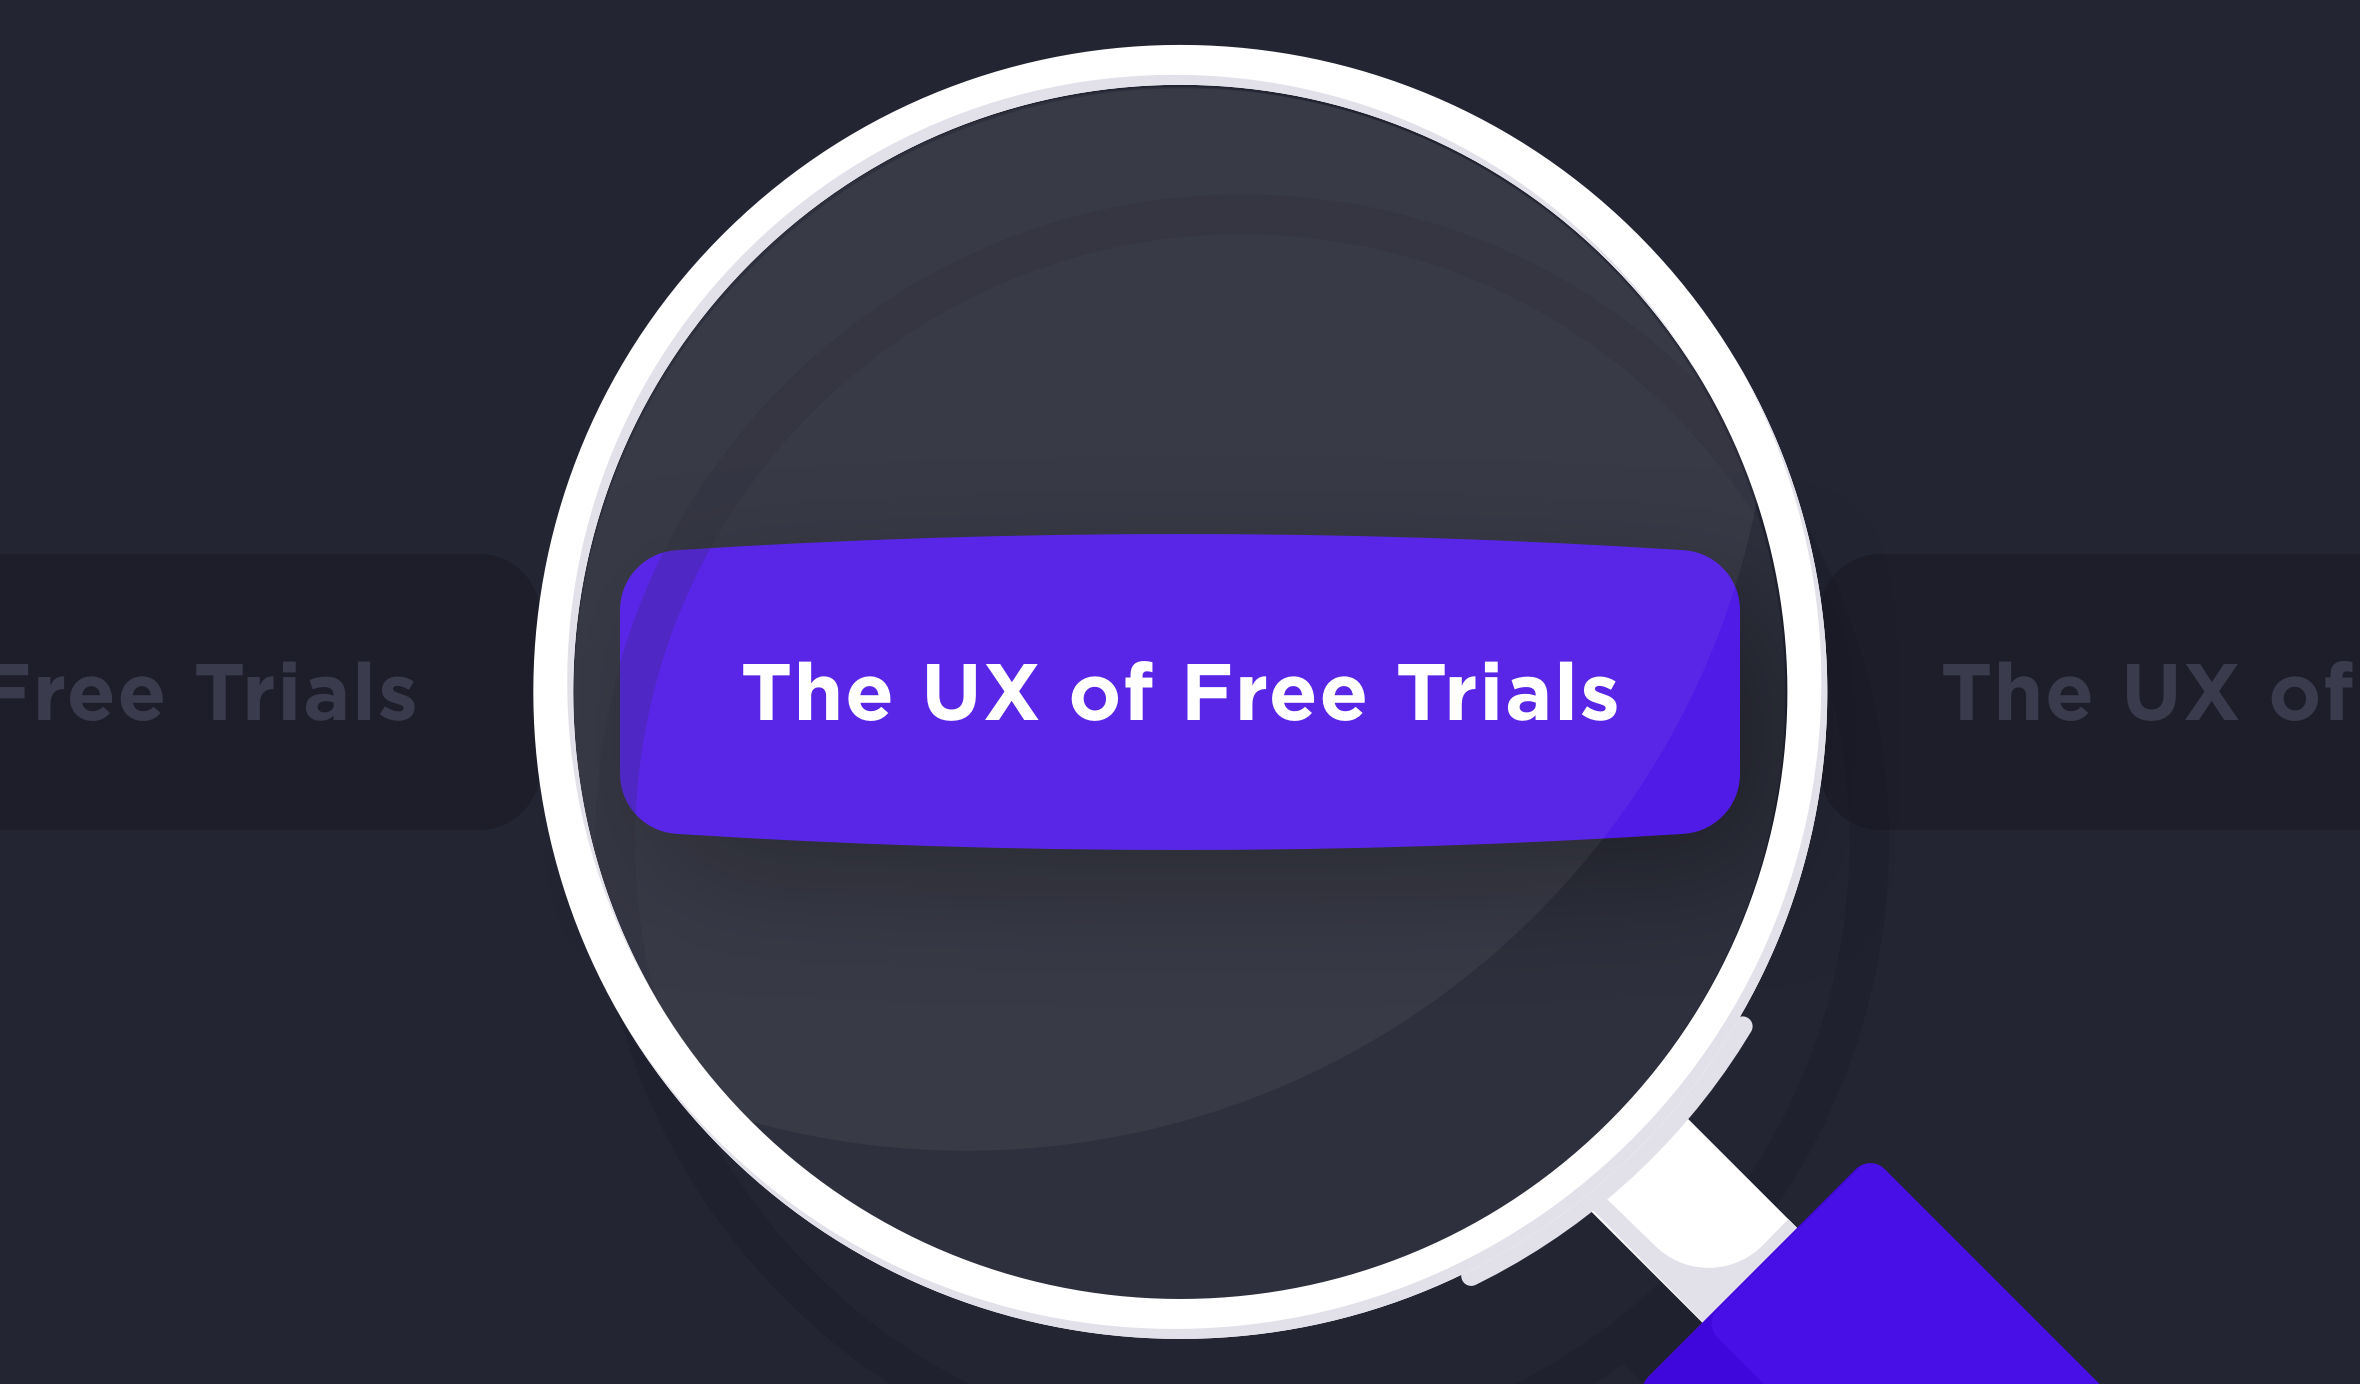 Experience a free trial offer